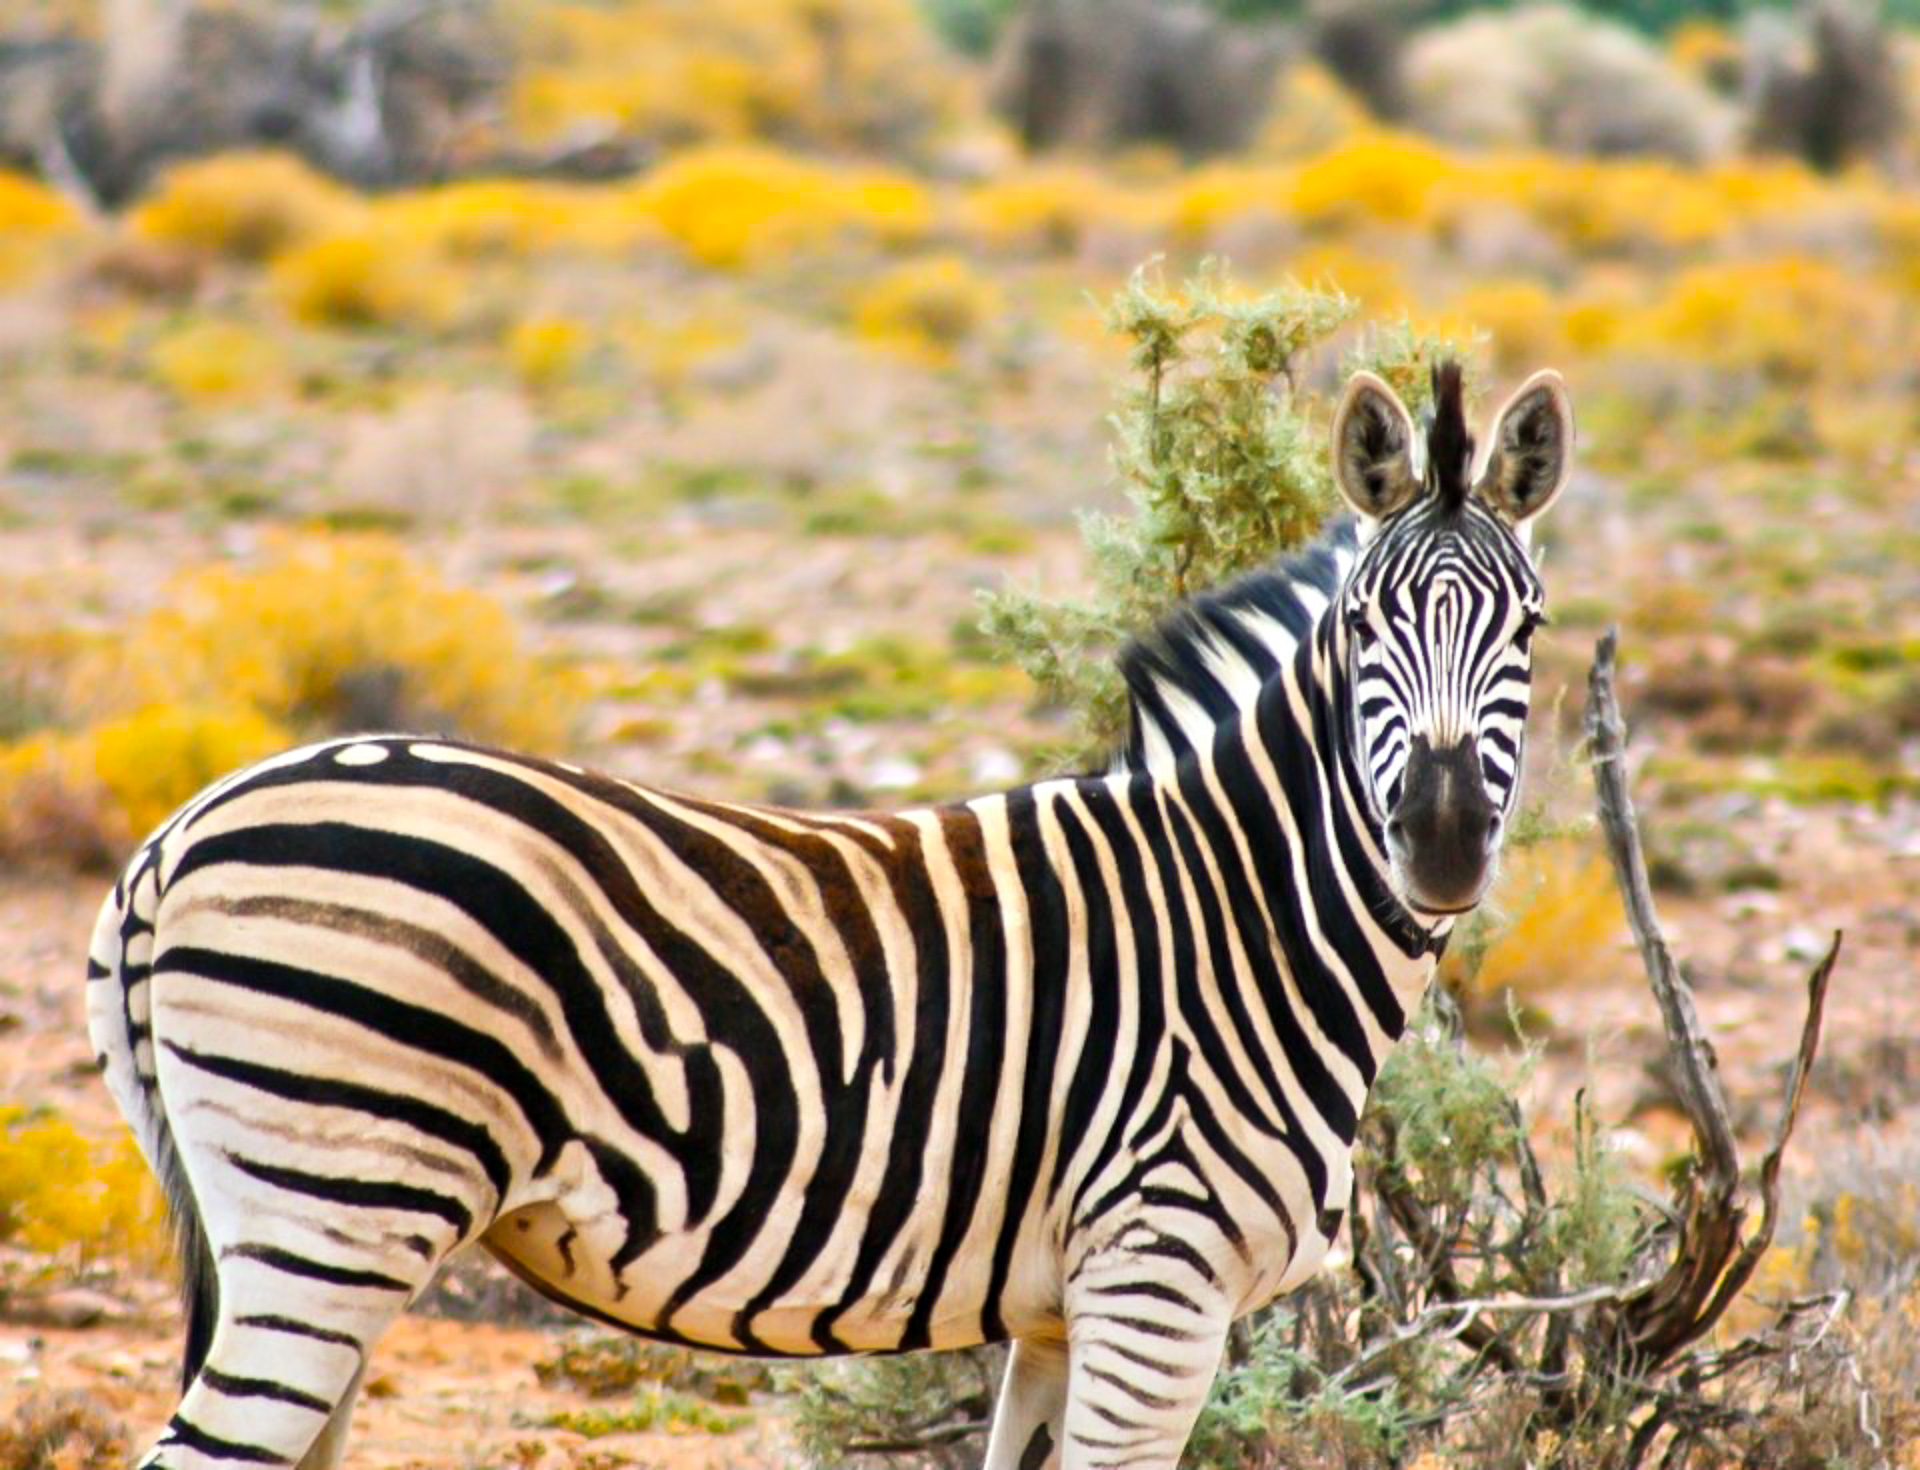 24 Images to Inspire You to go on a Safari in South Africa